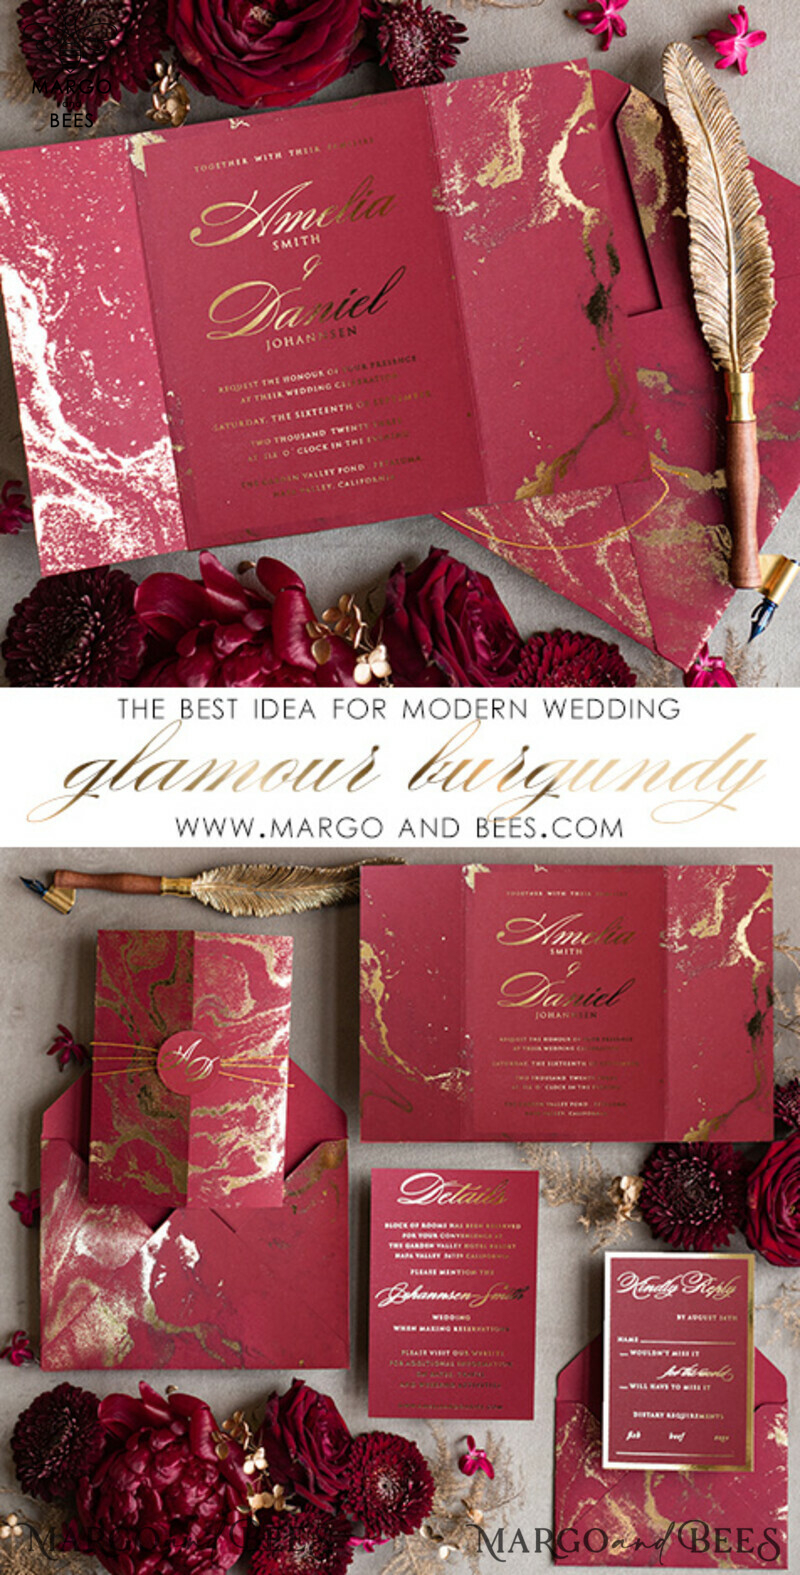 Golden Burgundy Marble Wedding Invitations: Add an Element of Luxury to Your Special Day
Luxury Gold Foil Wedding Invitation Set: Elevate Your Wedding with Opulence and Elegance
Marble Glamour Wedding Invitation Suite: Make a Statement with Stunning Marble Accents
Elegant Wedding Cards Marble: Exude Sophistication and Style on Your Big Day
Indian Wedding Cards: Infuse Traditional Elegance with a Touch of Marble Glamour-3